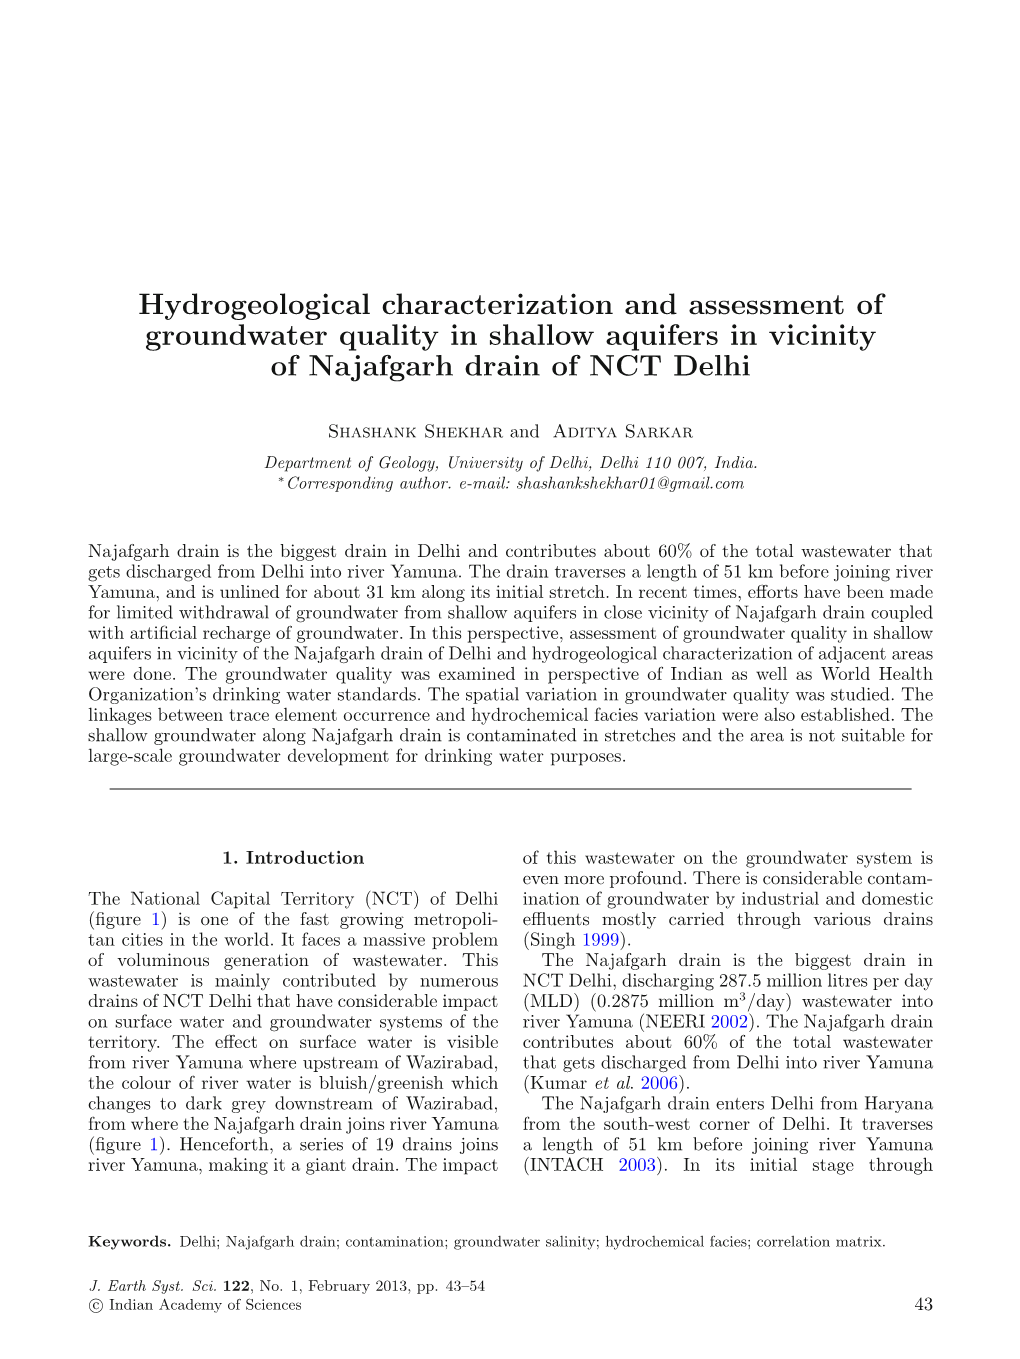 Hydrogeological Characterization and Assessment of Groundwater Quality in Shallow Aquifers in Vicinity of Najafgarh Drain of NCT Delhi